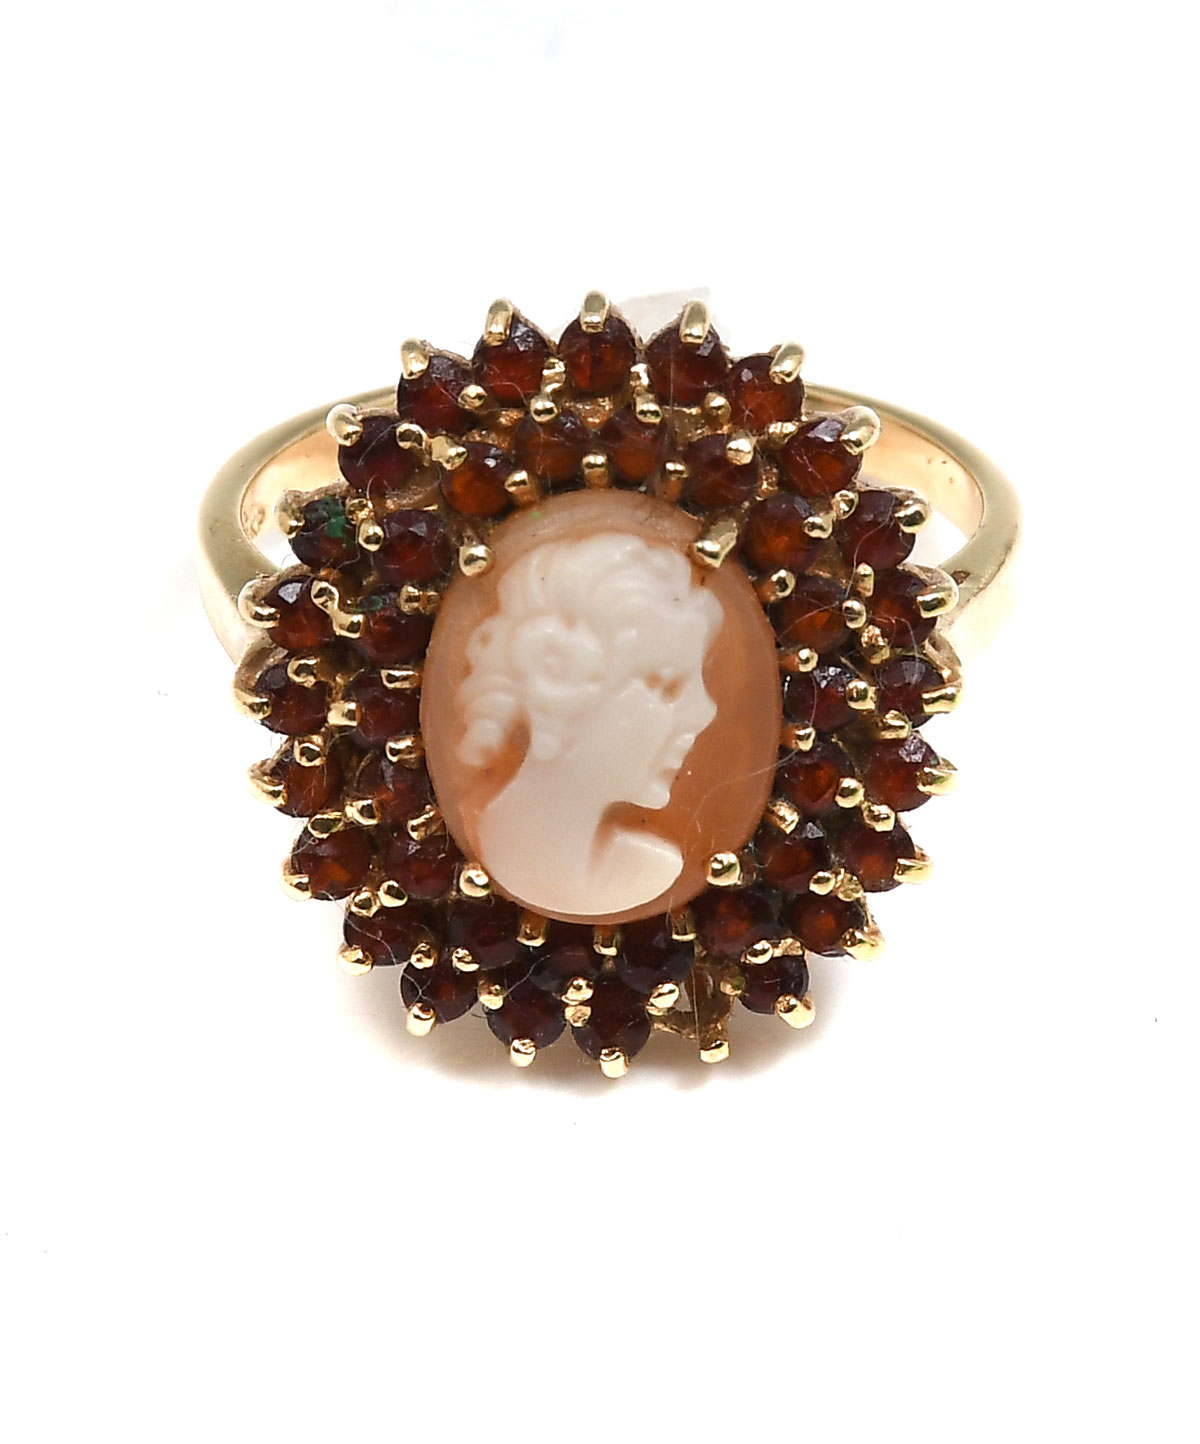 14K CAMEO RING WITH GARNETS: 14K